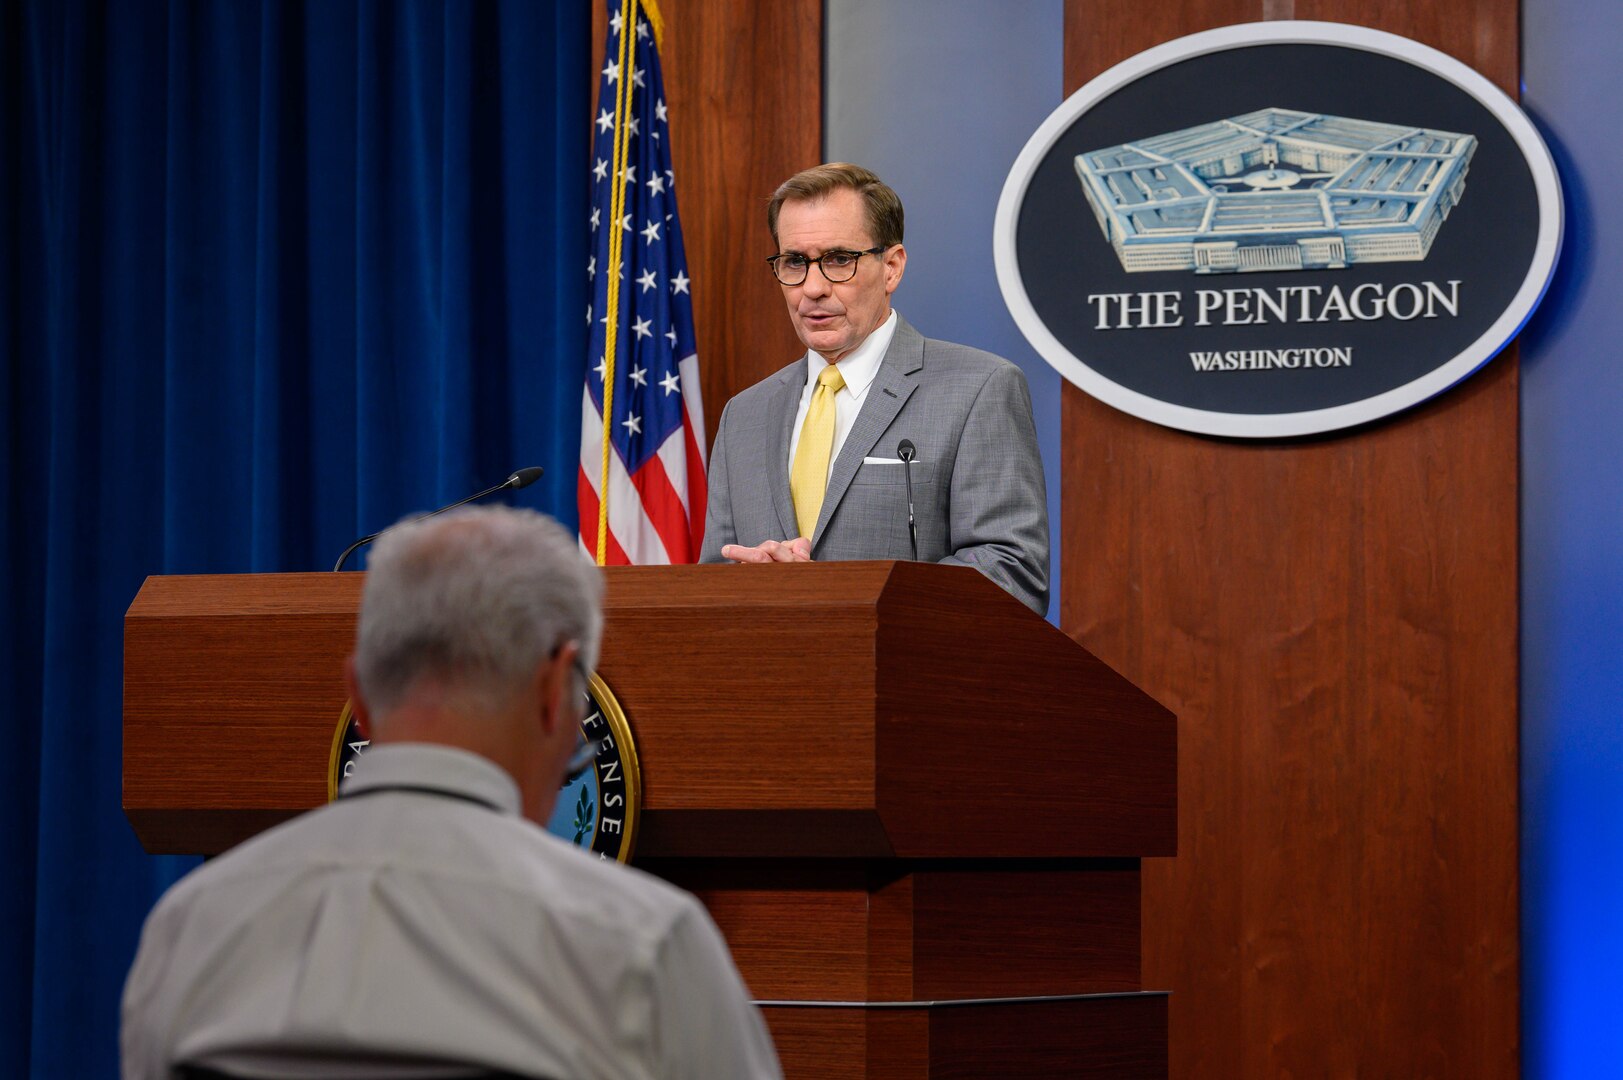 A man stands behind a lectern. Behind him is a sign that reads "The Pentagon."